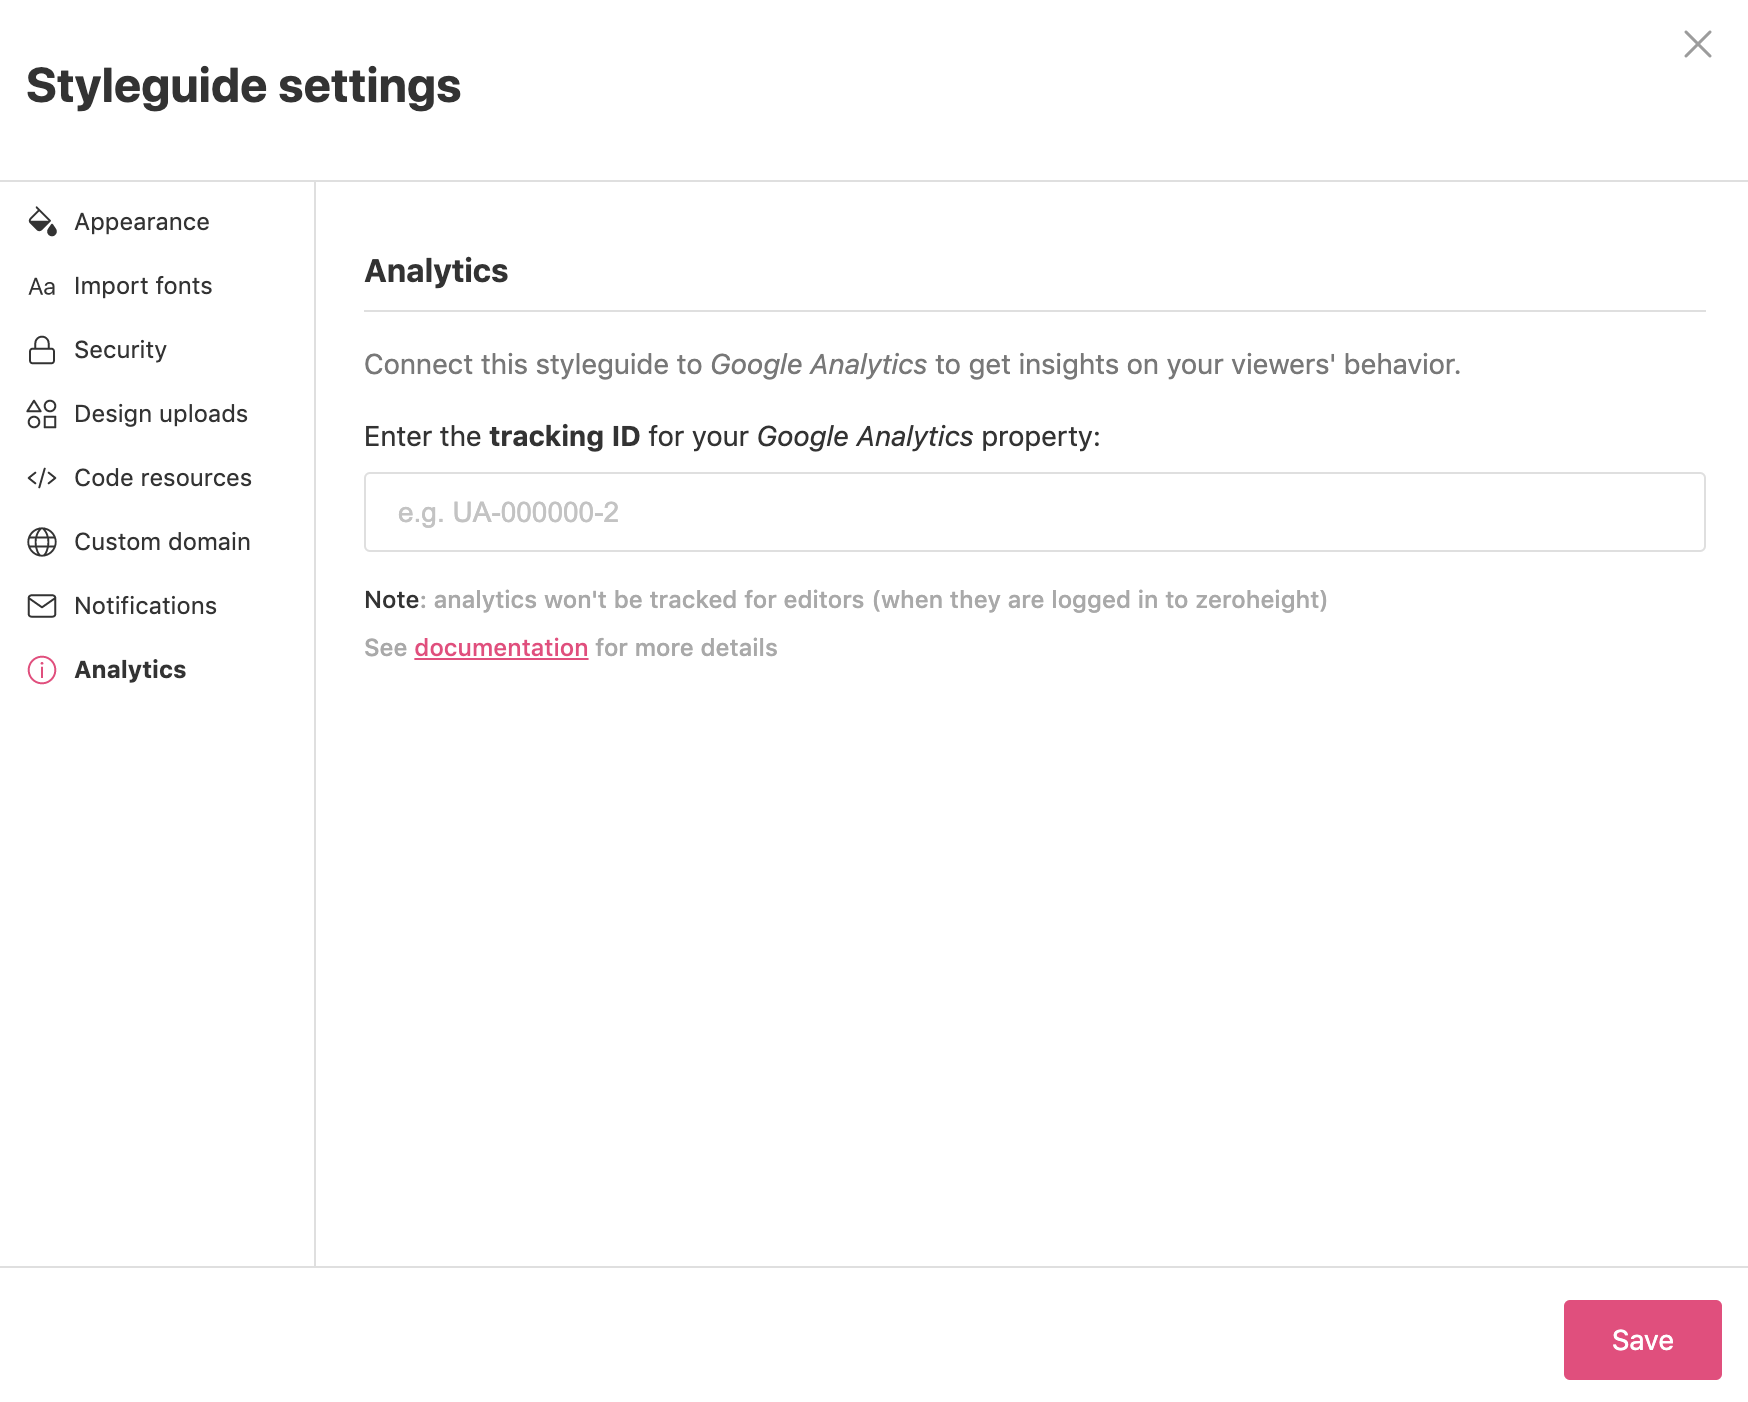 Analytics section in the Styleguide Settings